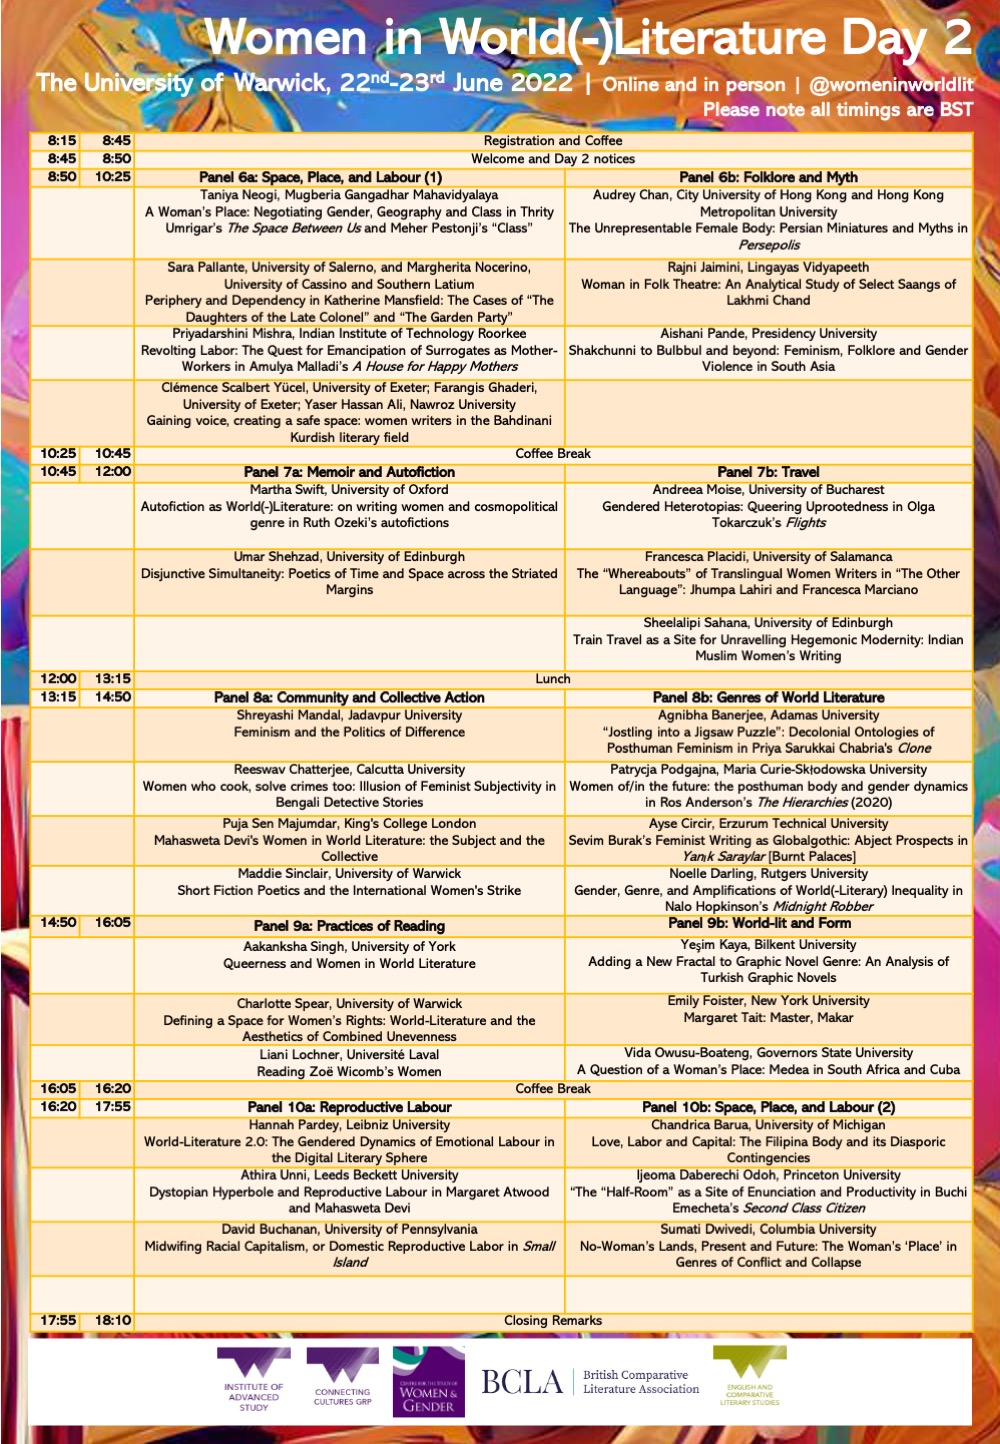 Schedule for Women in World(-)Literature conference Day 2. Plain text version below.